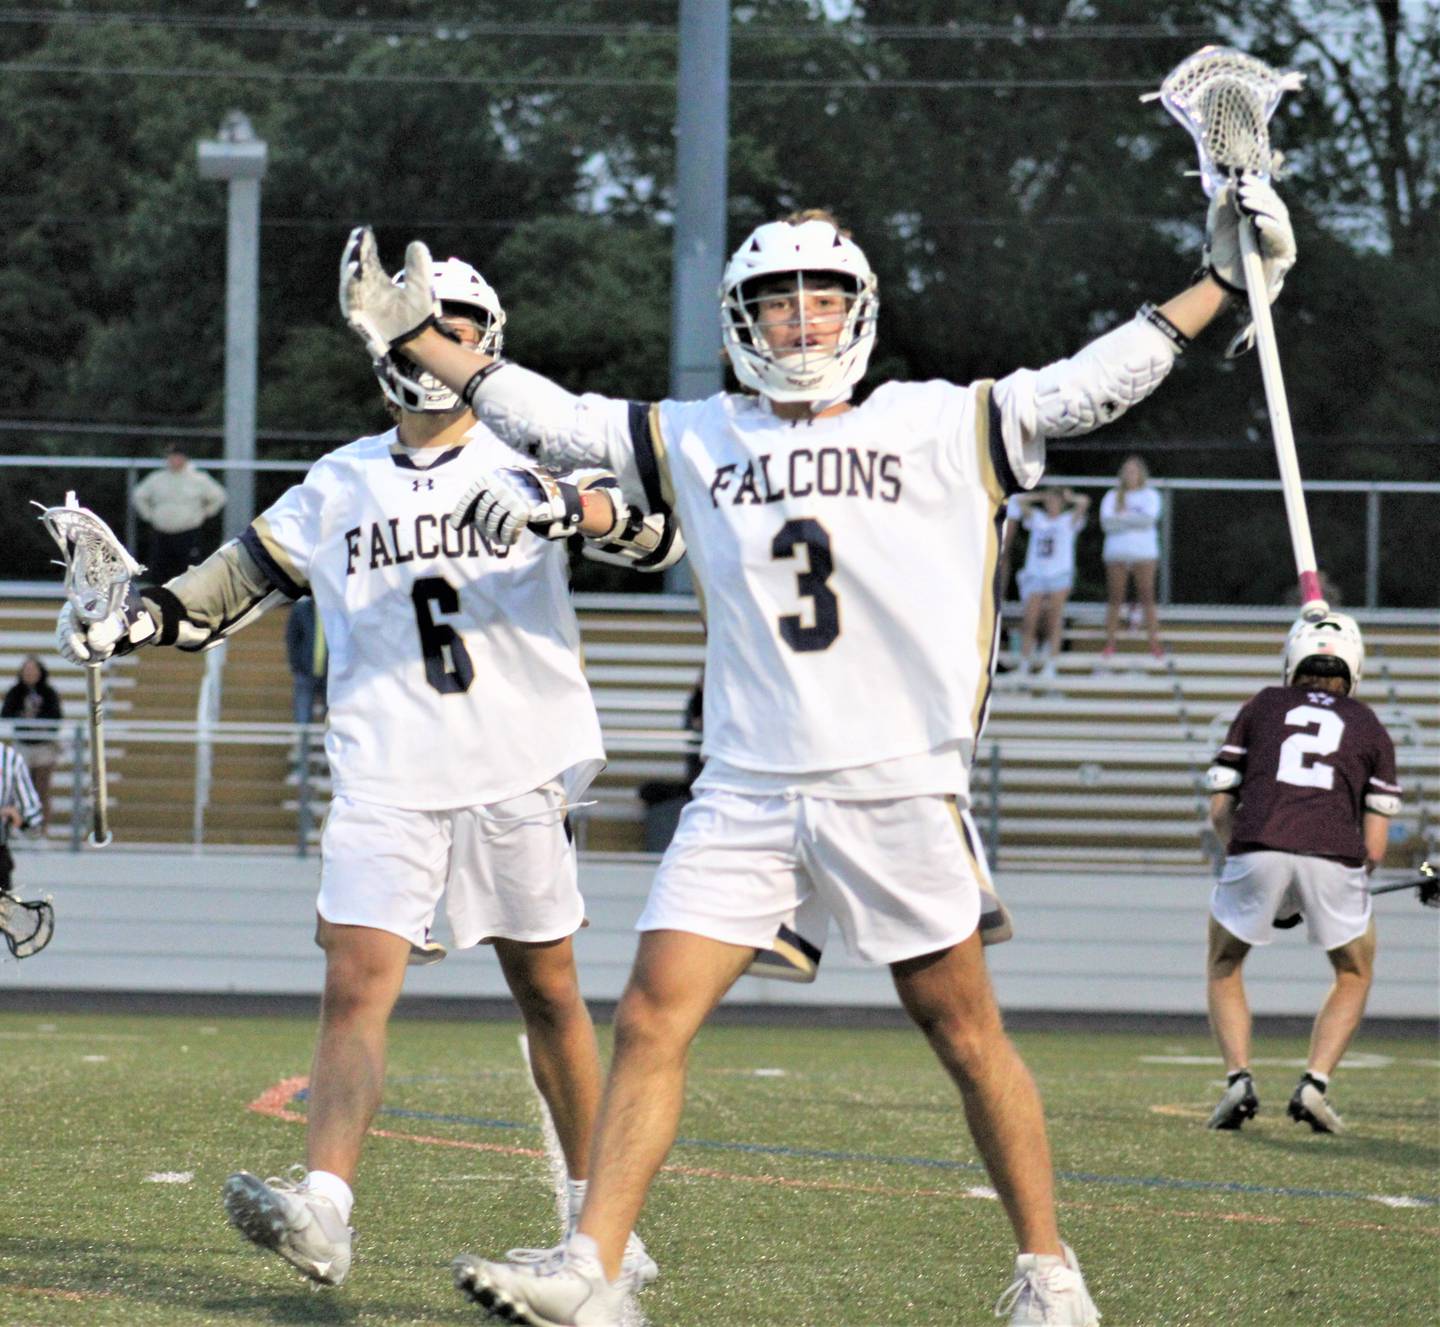 Severna Park sophomore Jack Fish (3) celebrates with teammate Alex Stroble after scoring his third goal of the game during the fourth period of Wednesday's Class 3A state boys lacrosse quarterfinal match with Towson. The No. 11 and defending state champ Falcons rallied for an 8-5 victory over the Generals to advance this weekend's state semifinals.